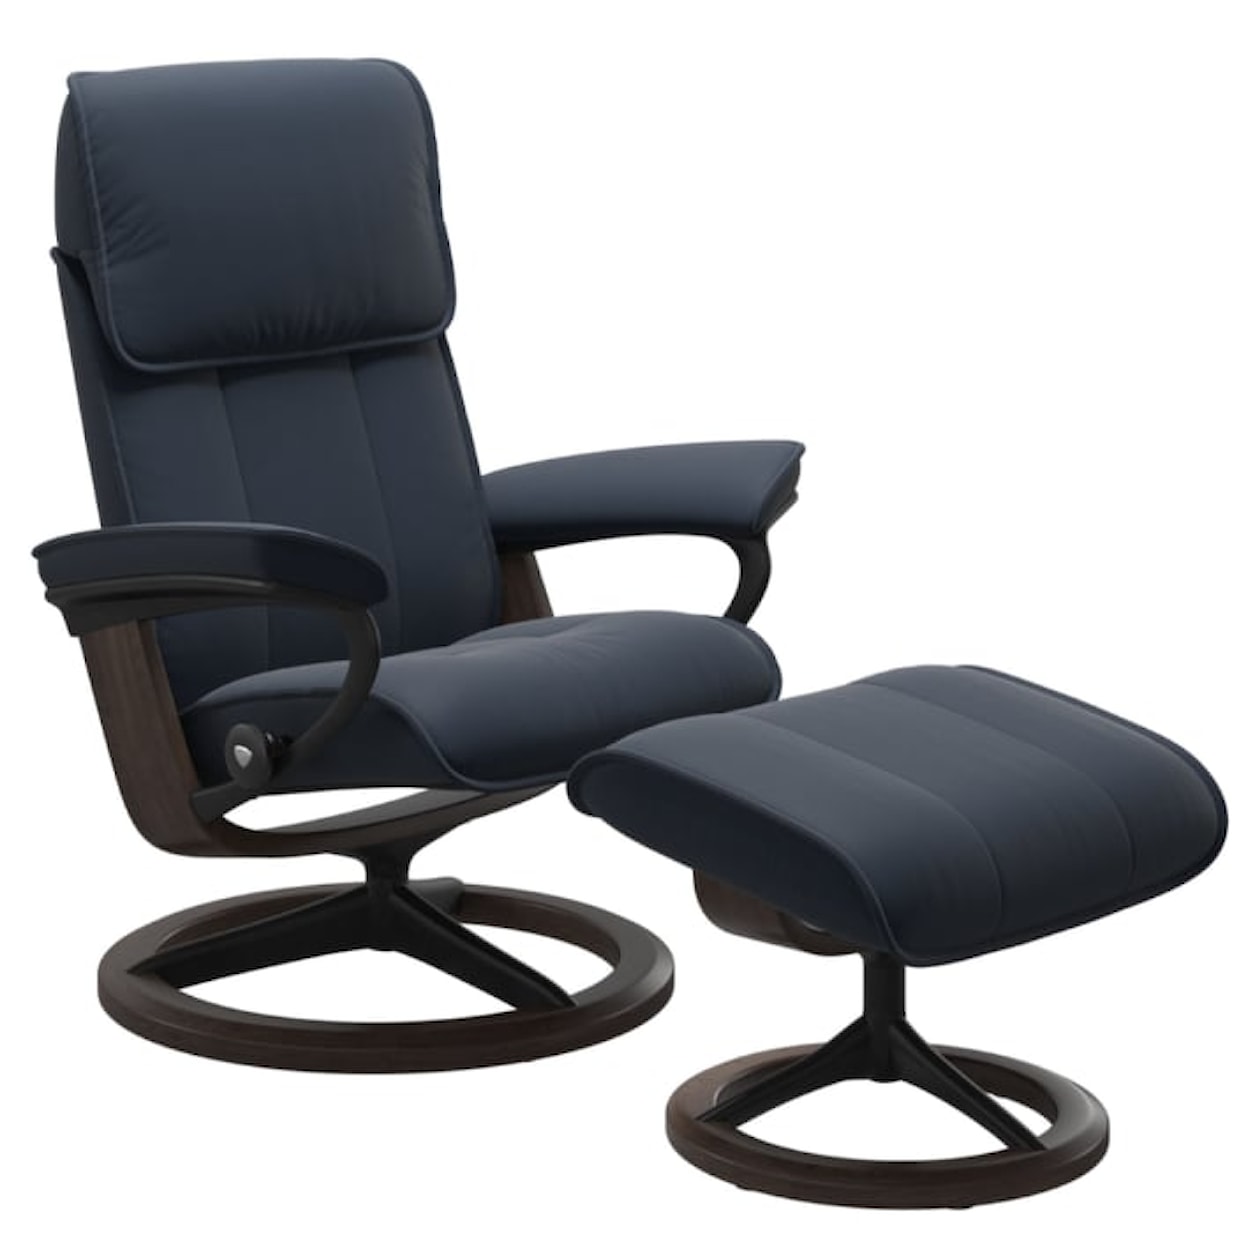 Stressless by Ekornes Admiral Large Reclining Chair with Signature Base